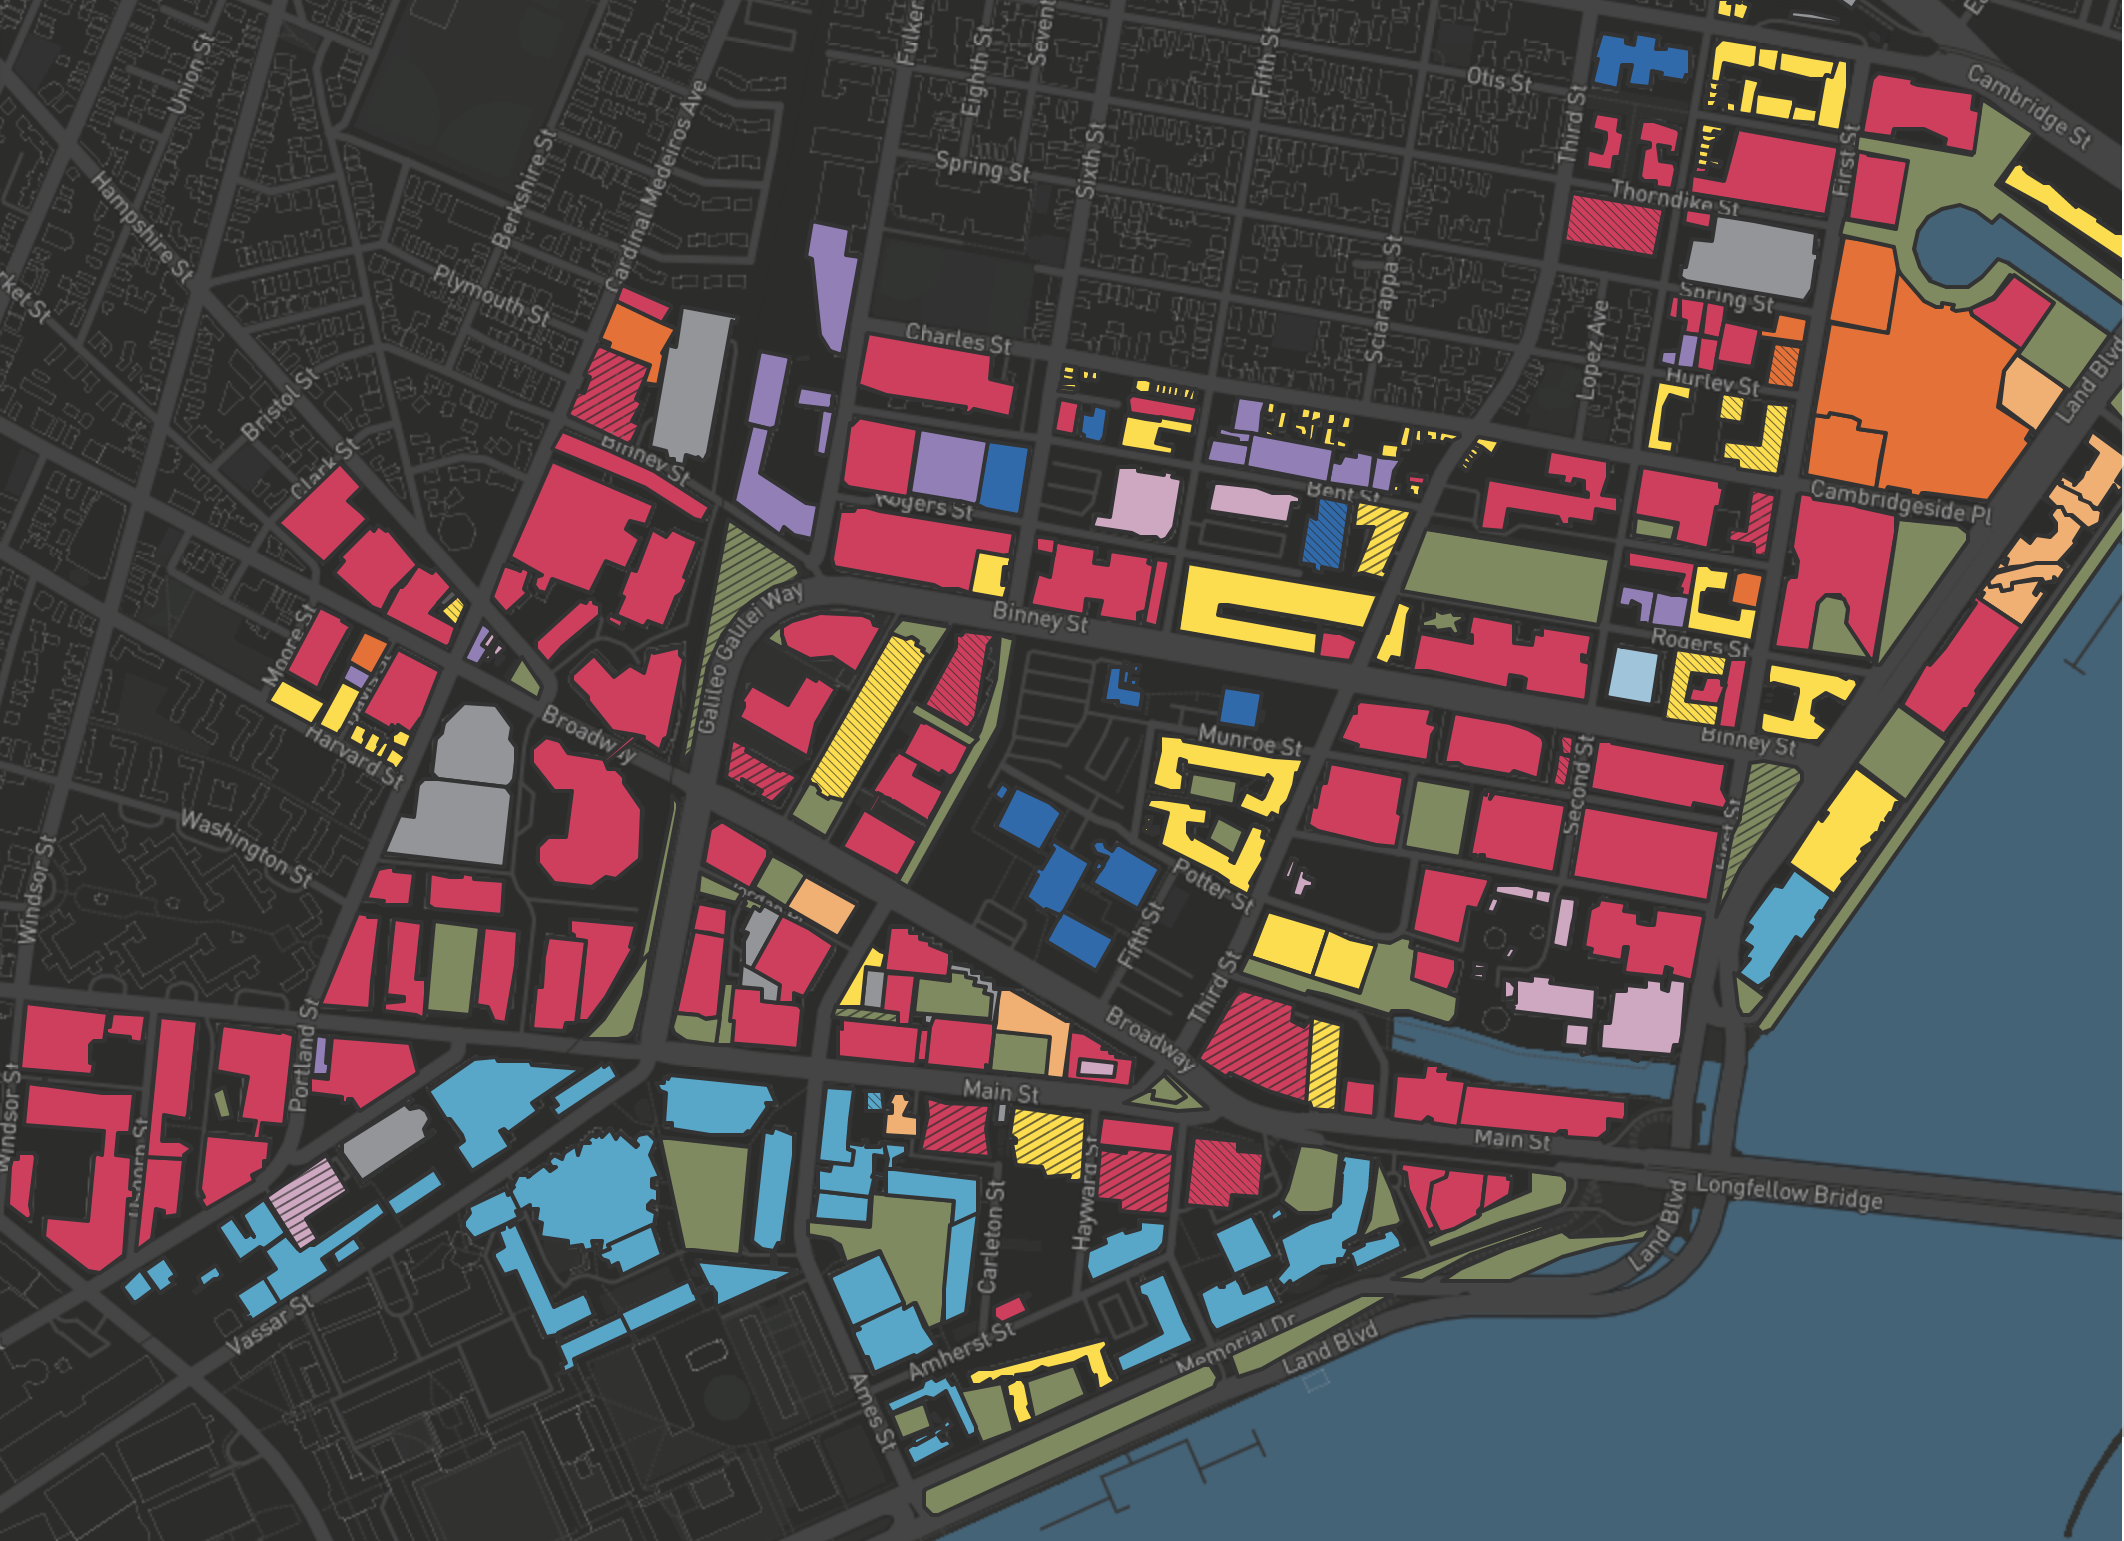 A 2018 map of MIT’s Kendall Square depicting the concentration of commercial R&D/office buildings (pink) surrounding MIT university buildings (blue).